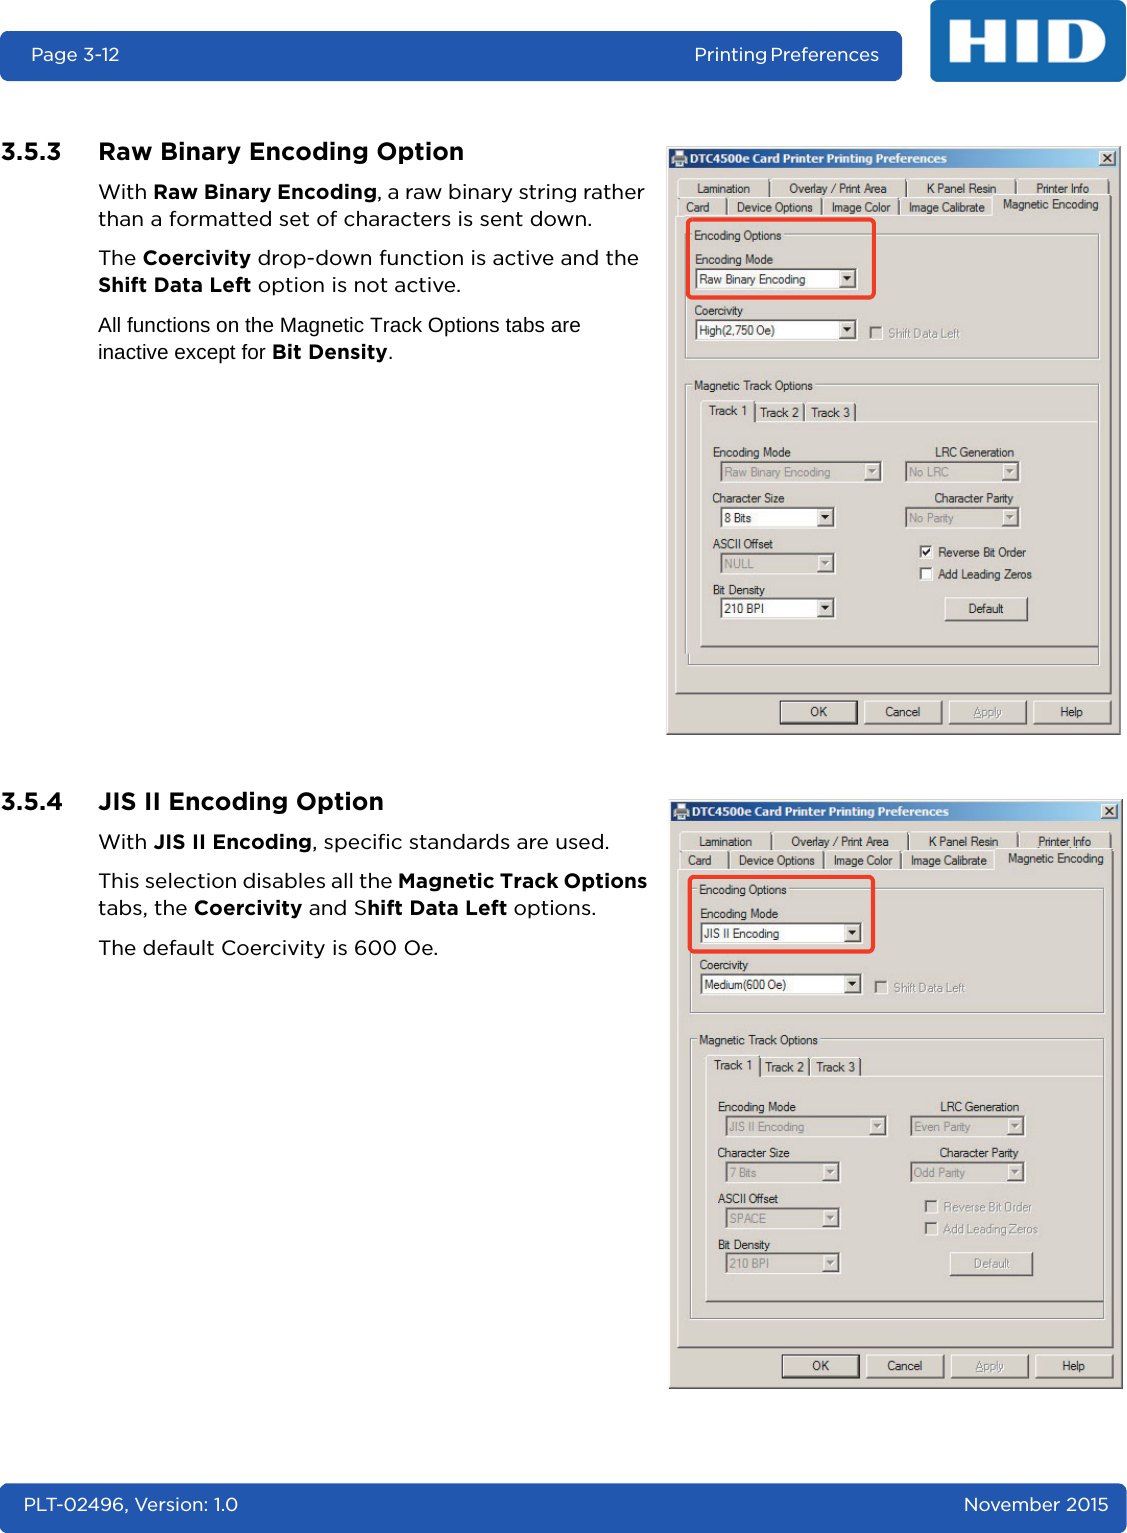 Page 3-12 Printing Preferences PLT-02496, Version: 1.0 November 20153.5.3 Raw Binary Encoding OptionWith Raw Binary Encoding, a raw binary string rather than a formatted set of characters is sent down.The Coercivity drop-down function is active and the Shift Data Left option is not active.All functions on the Magnetic Track Options tabs are inactive except for Bit Density.3.5.4 JIS II Encoding OptionWith JIS II Encoding, specific standards are used.This selection disables all the Magnetic Track Options tabs, the Coercivity and Shift Data Left options.The default Coercivity is 600 Oe.